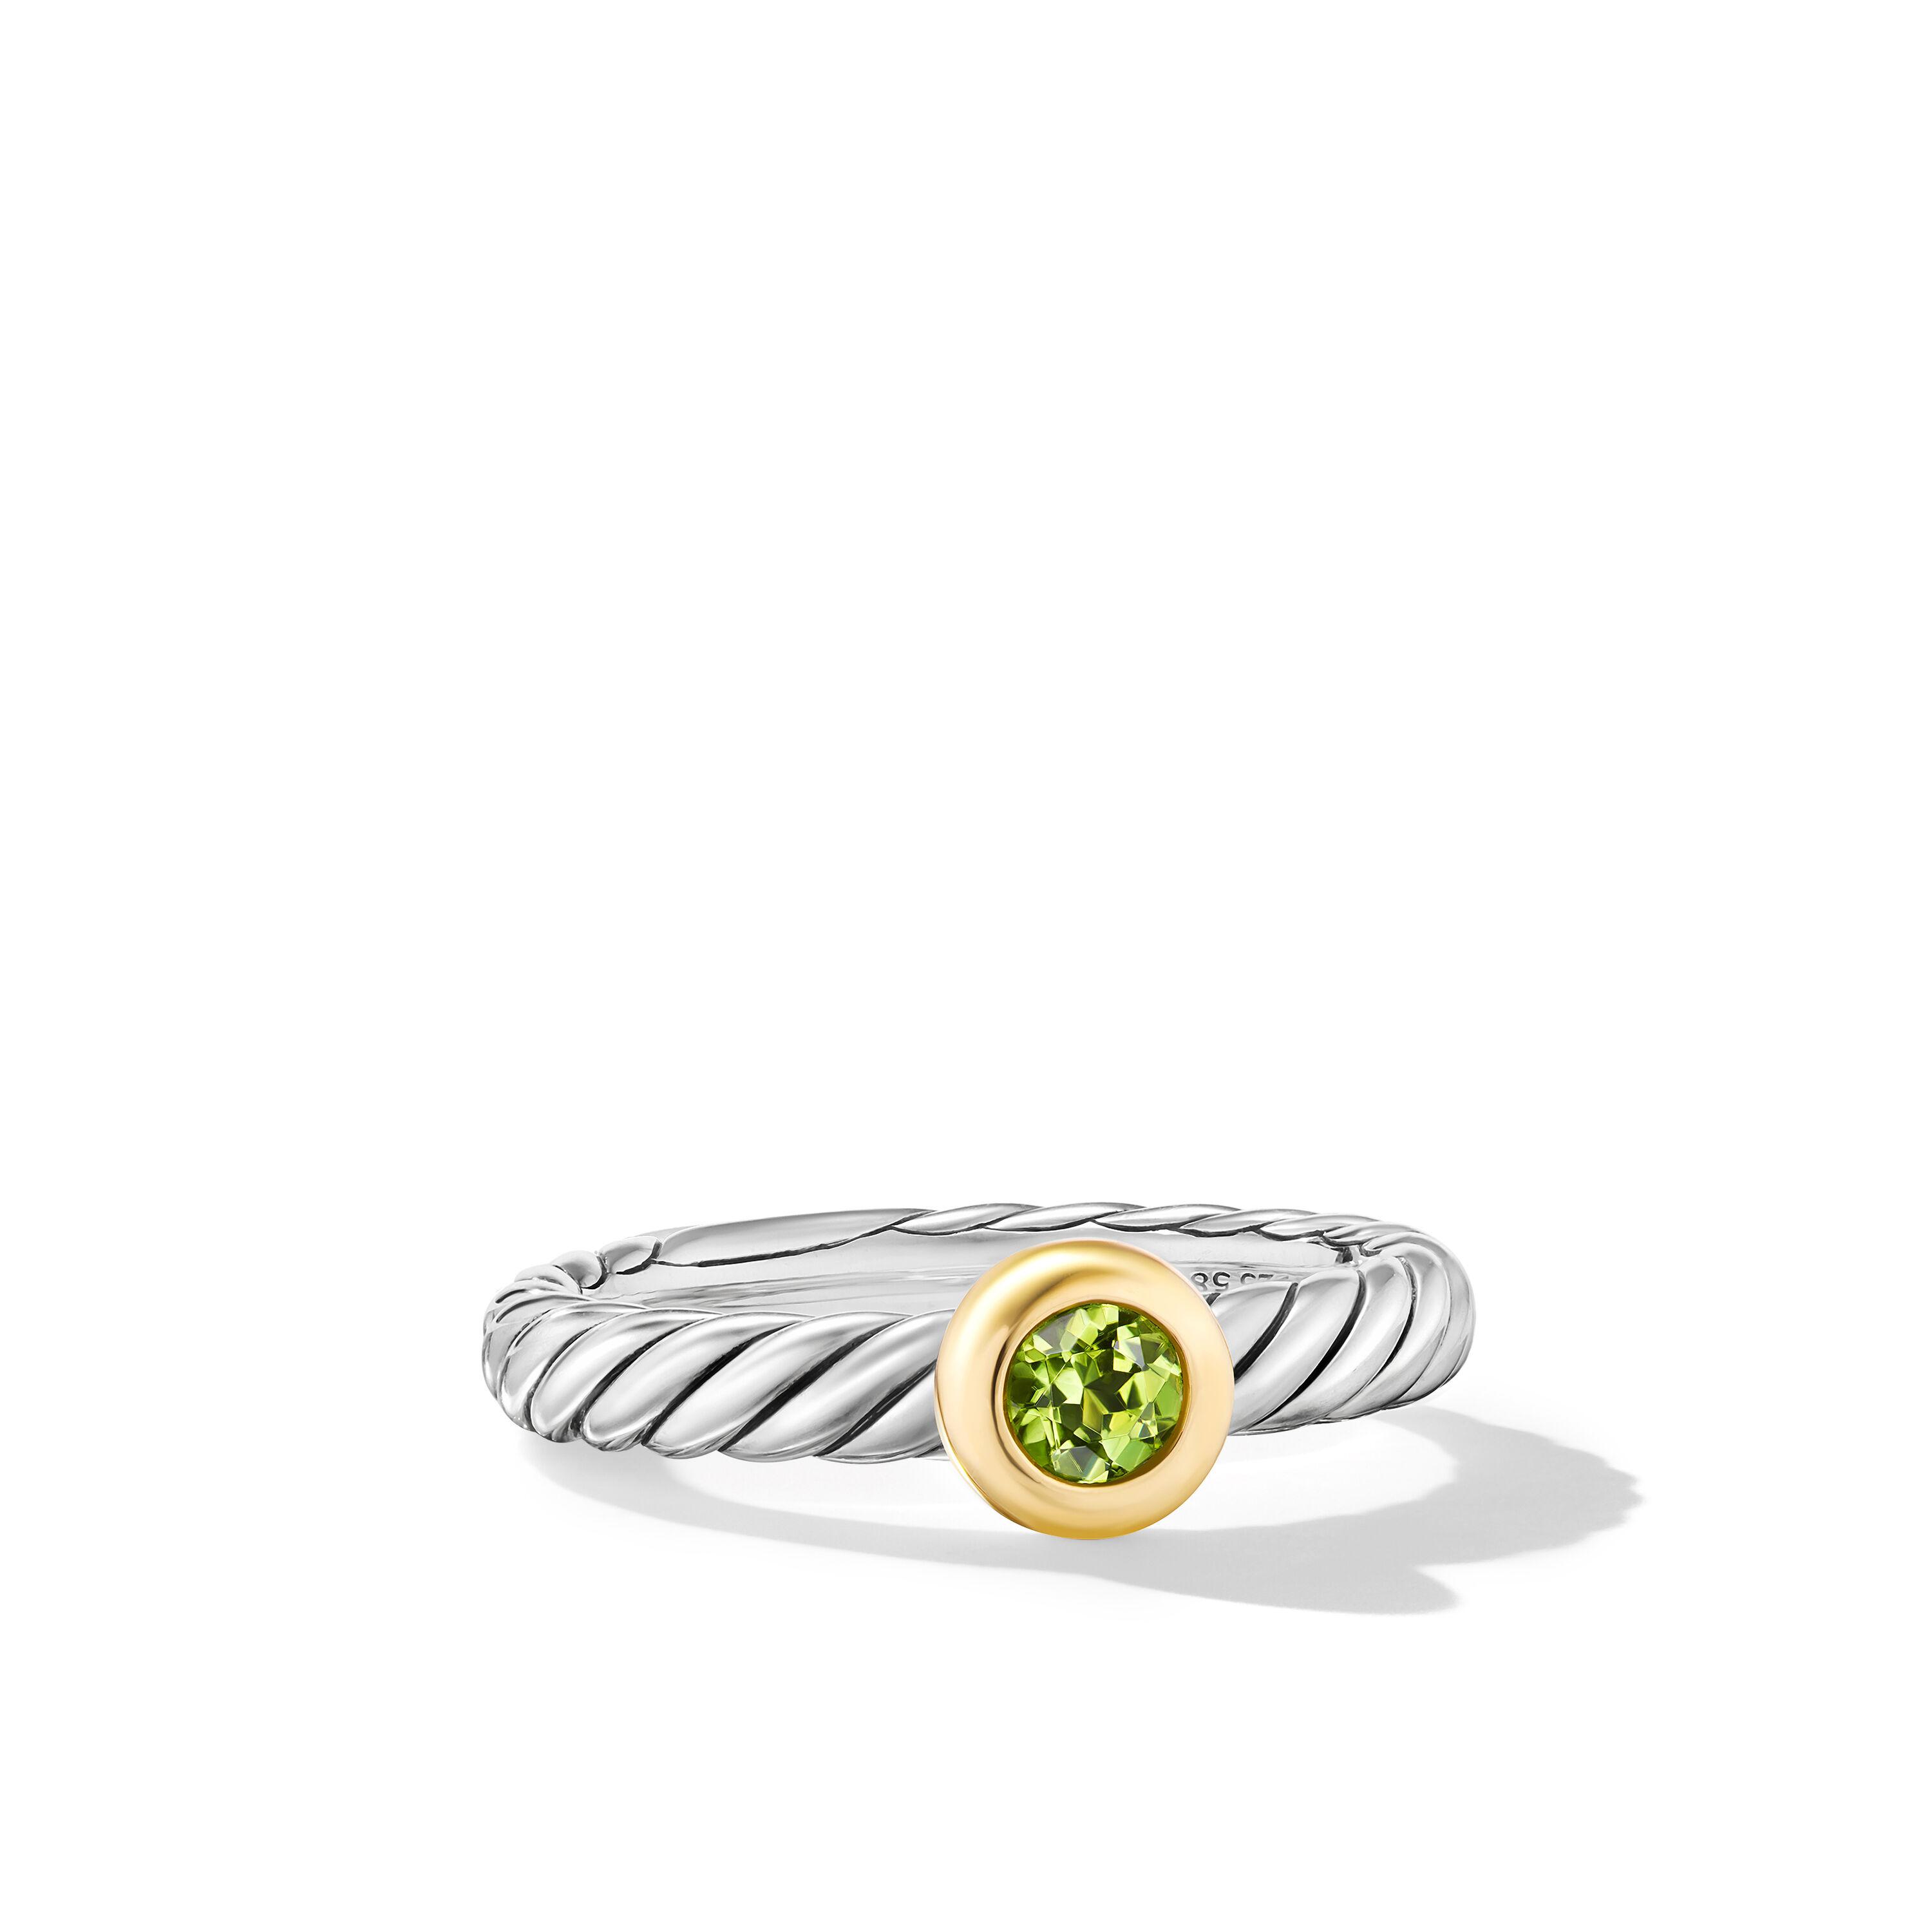 David Yurman Petite Cable Ring in Sterling Silver with 14K Yellow Gold and Peridot, Size 7